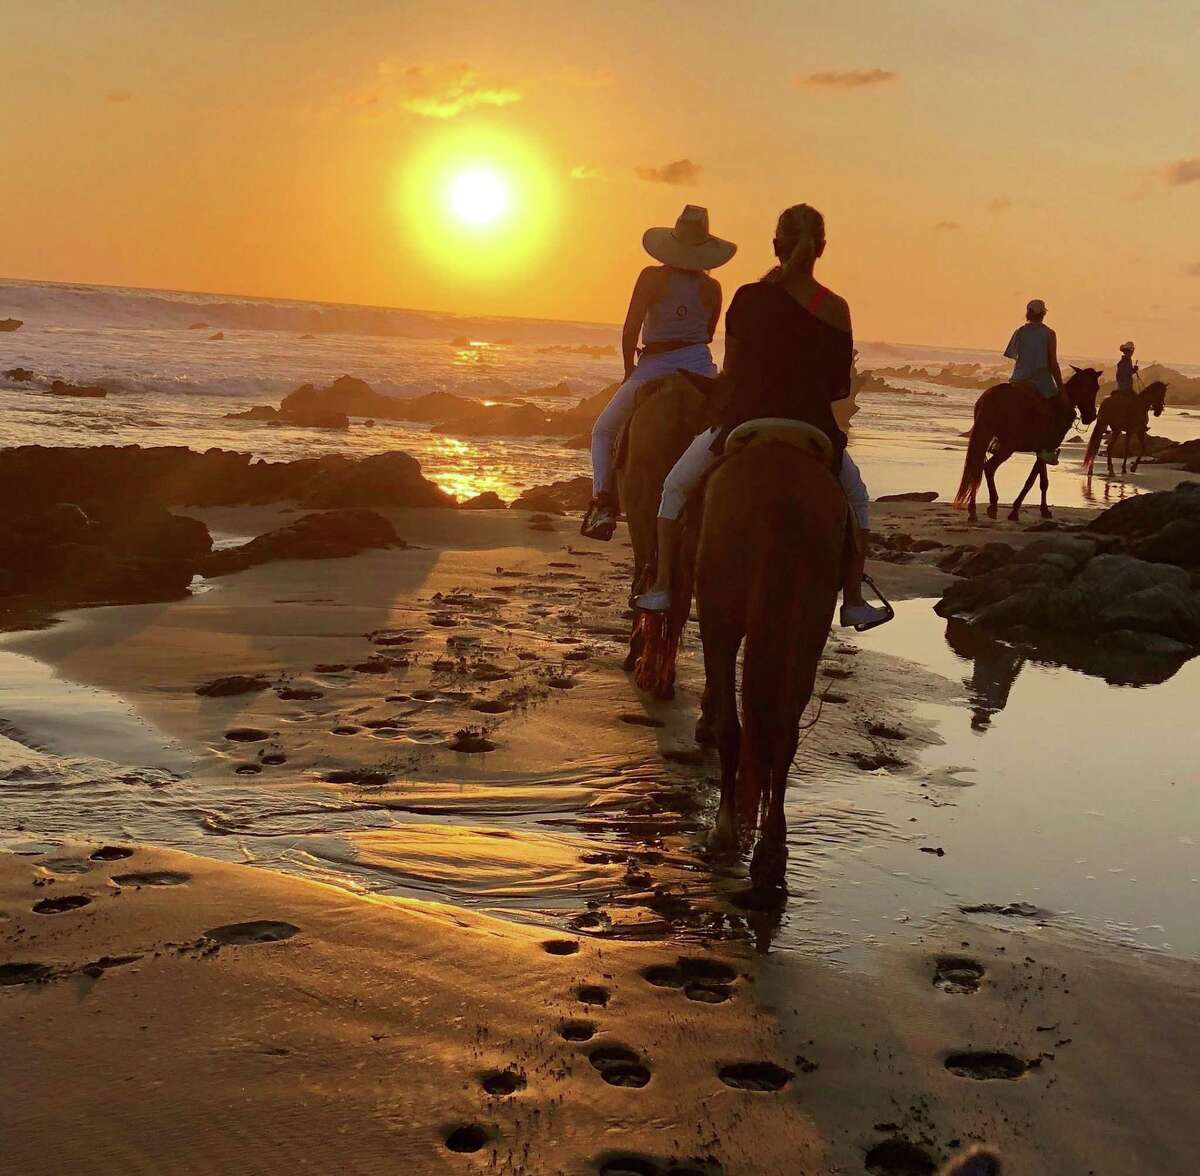 An end-of-the day horseback ride during the Austin Next Tribe group's yoga, writing and photography retreat in Troncones, Mexico